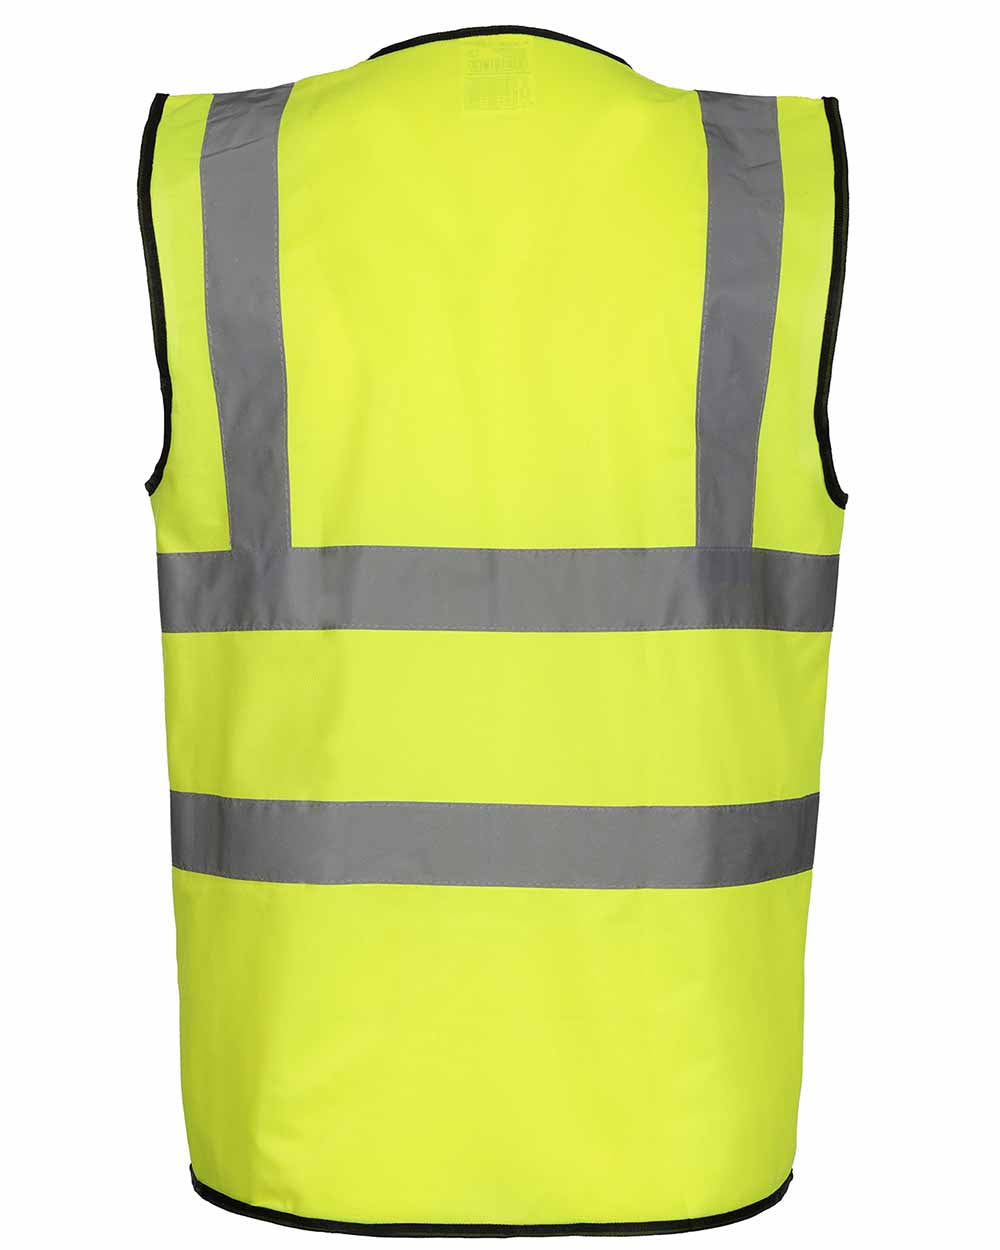 Back View Yellow Fort Hi-Vis Vest with reflective strips 